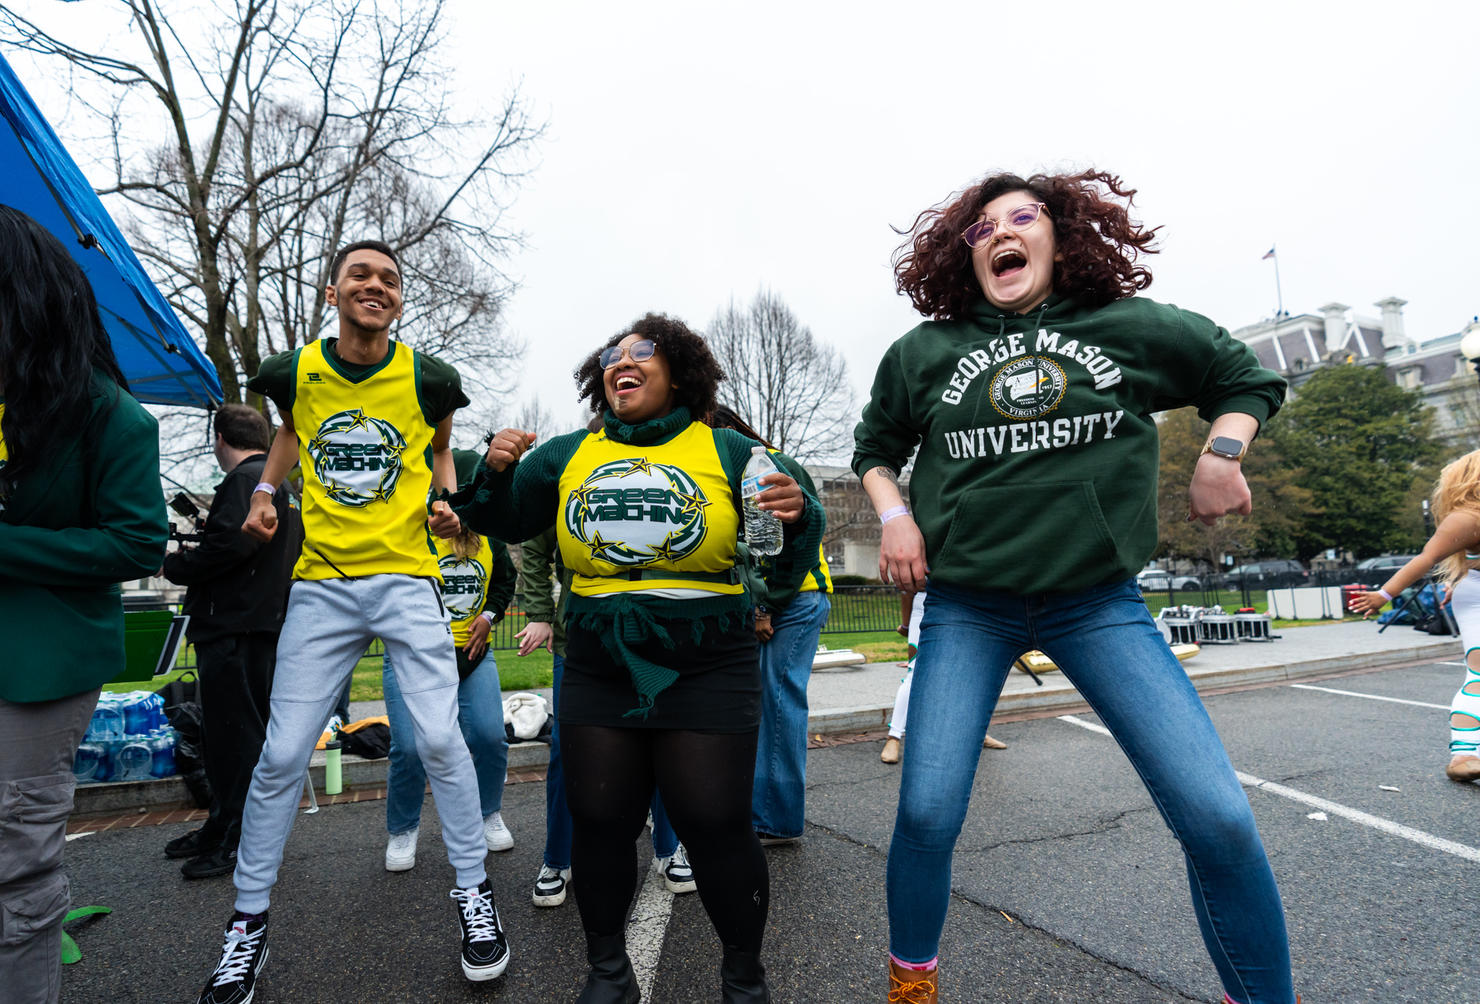 Students jump up and down, cheering with excitement, as the Green Machine Ensembles perform at the White House Easter Egg Roll. Photo by Joshua Cruse & Nathaniel Henry / Green Machine Ensembles